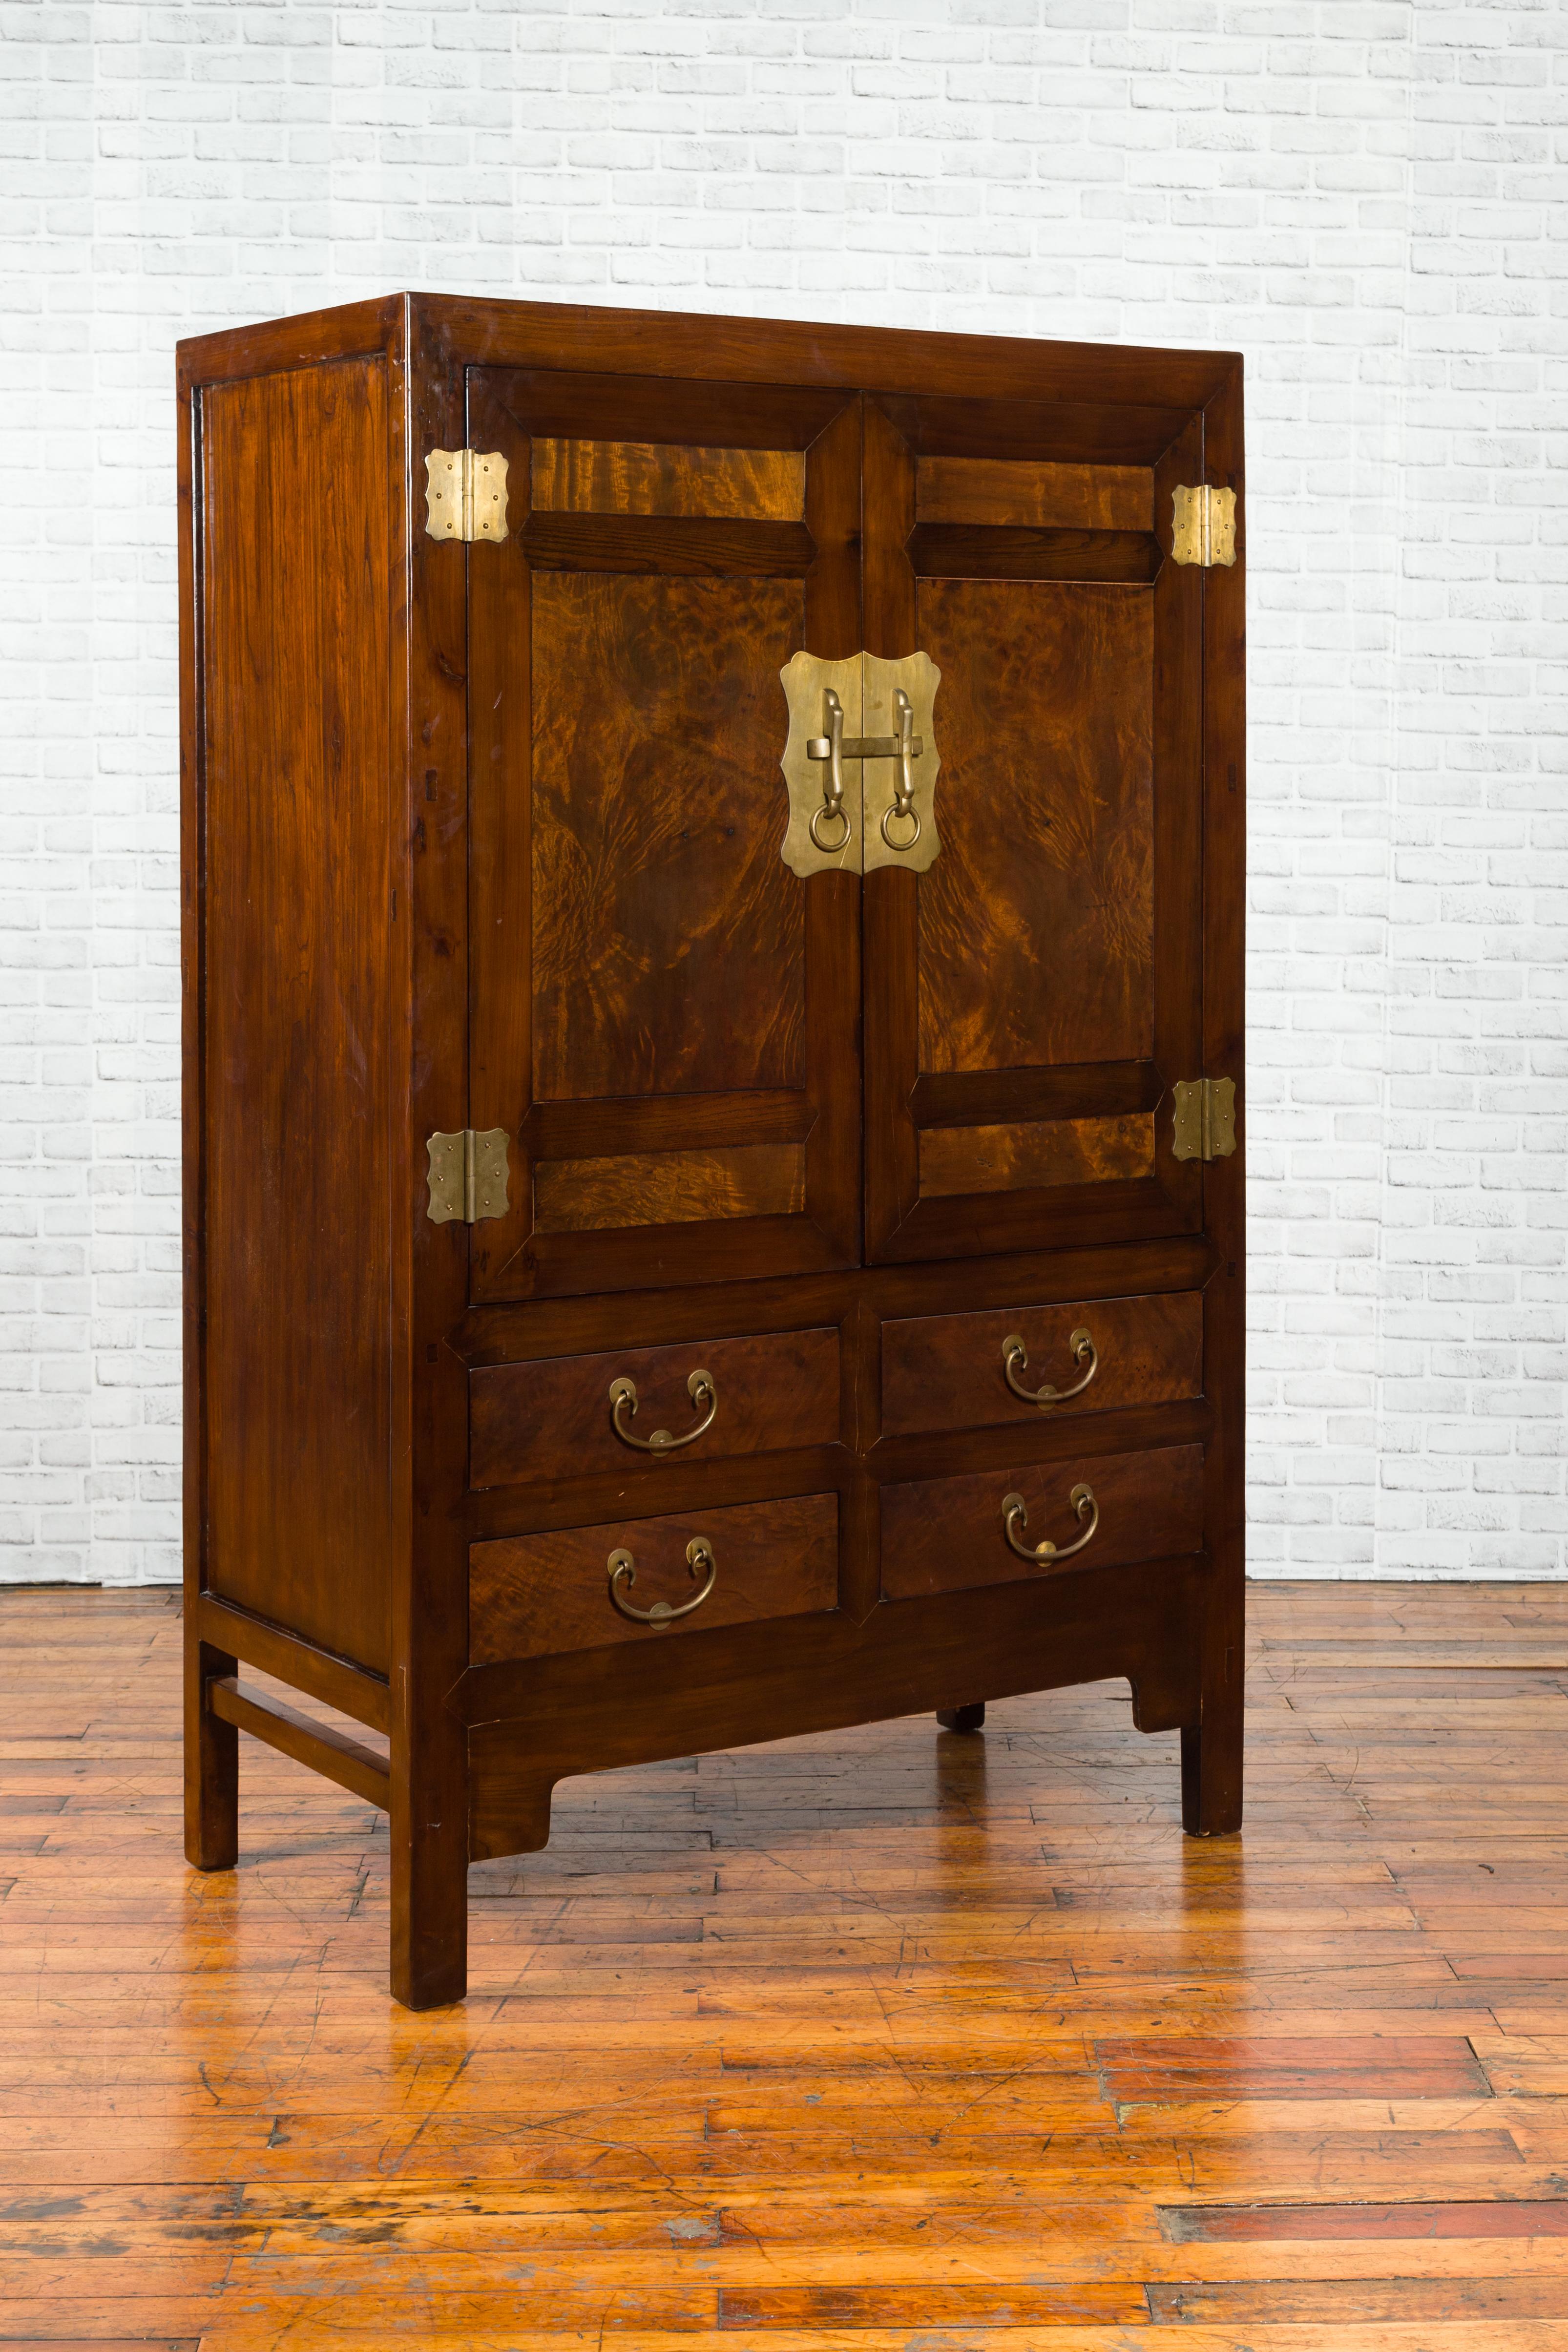 Chinese 1920s-1930s Elm and Burl Cabinet with Doors, Drawers and Brass Hardware For Sale 6